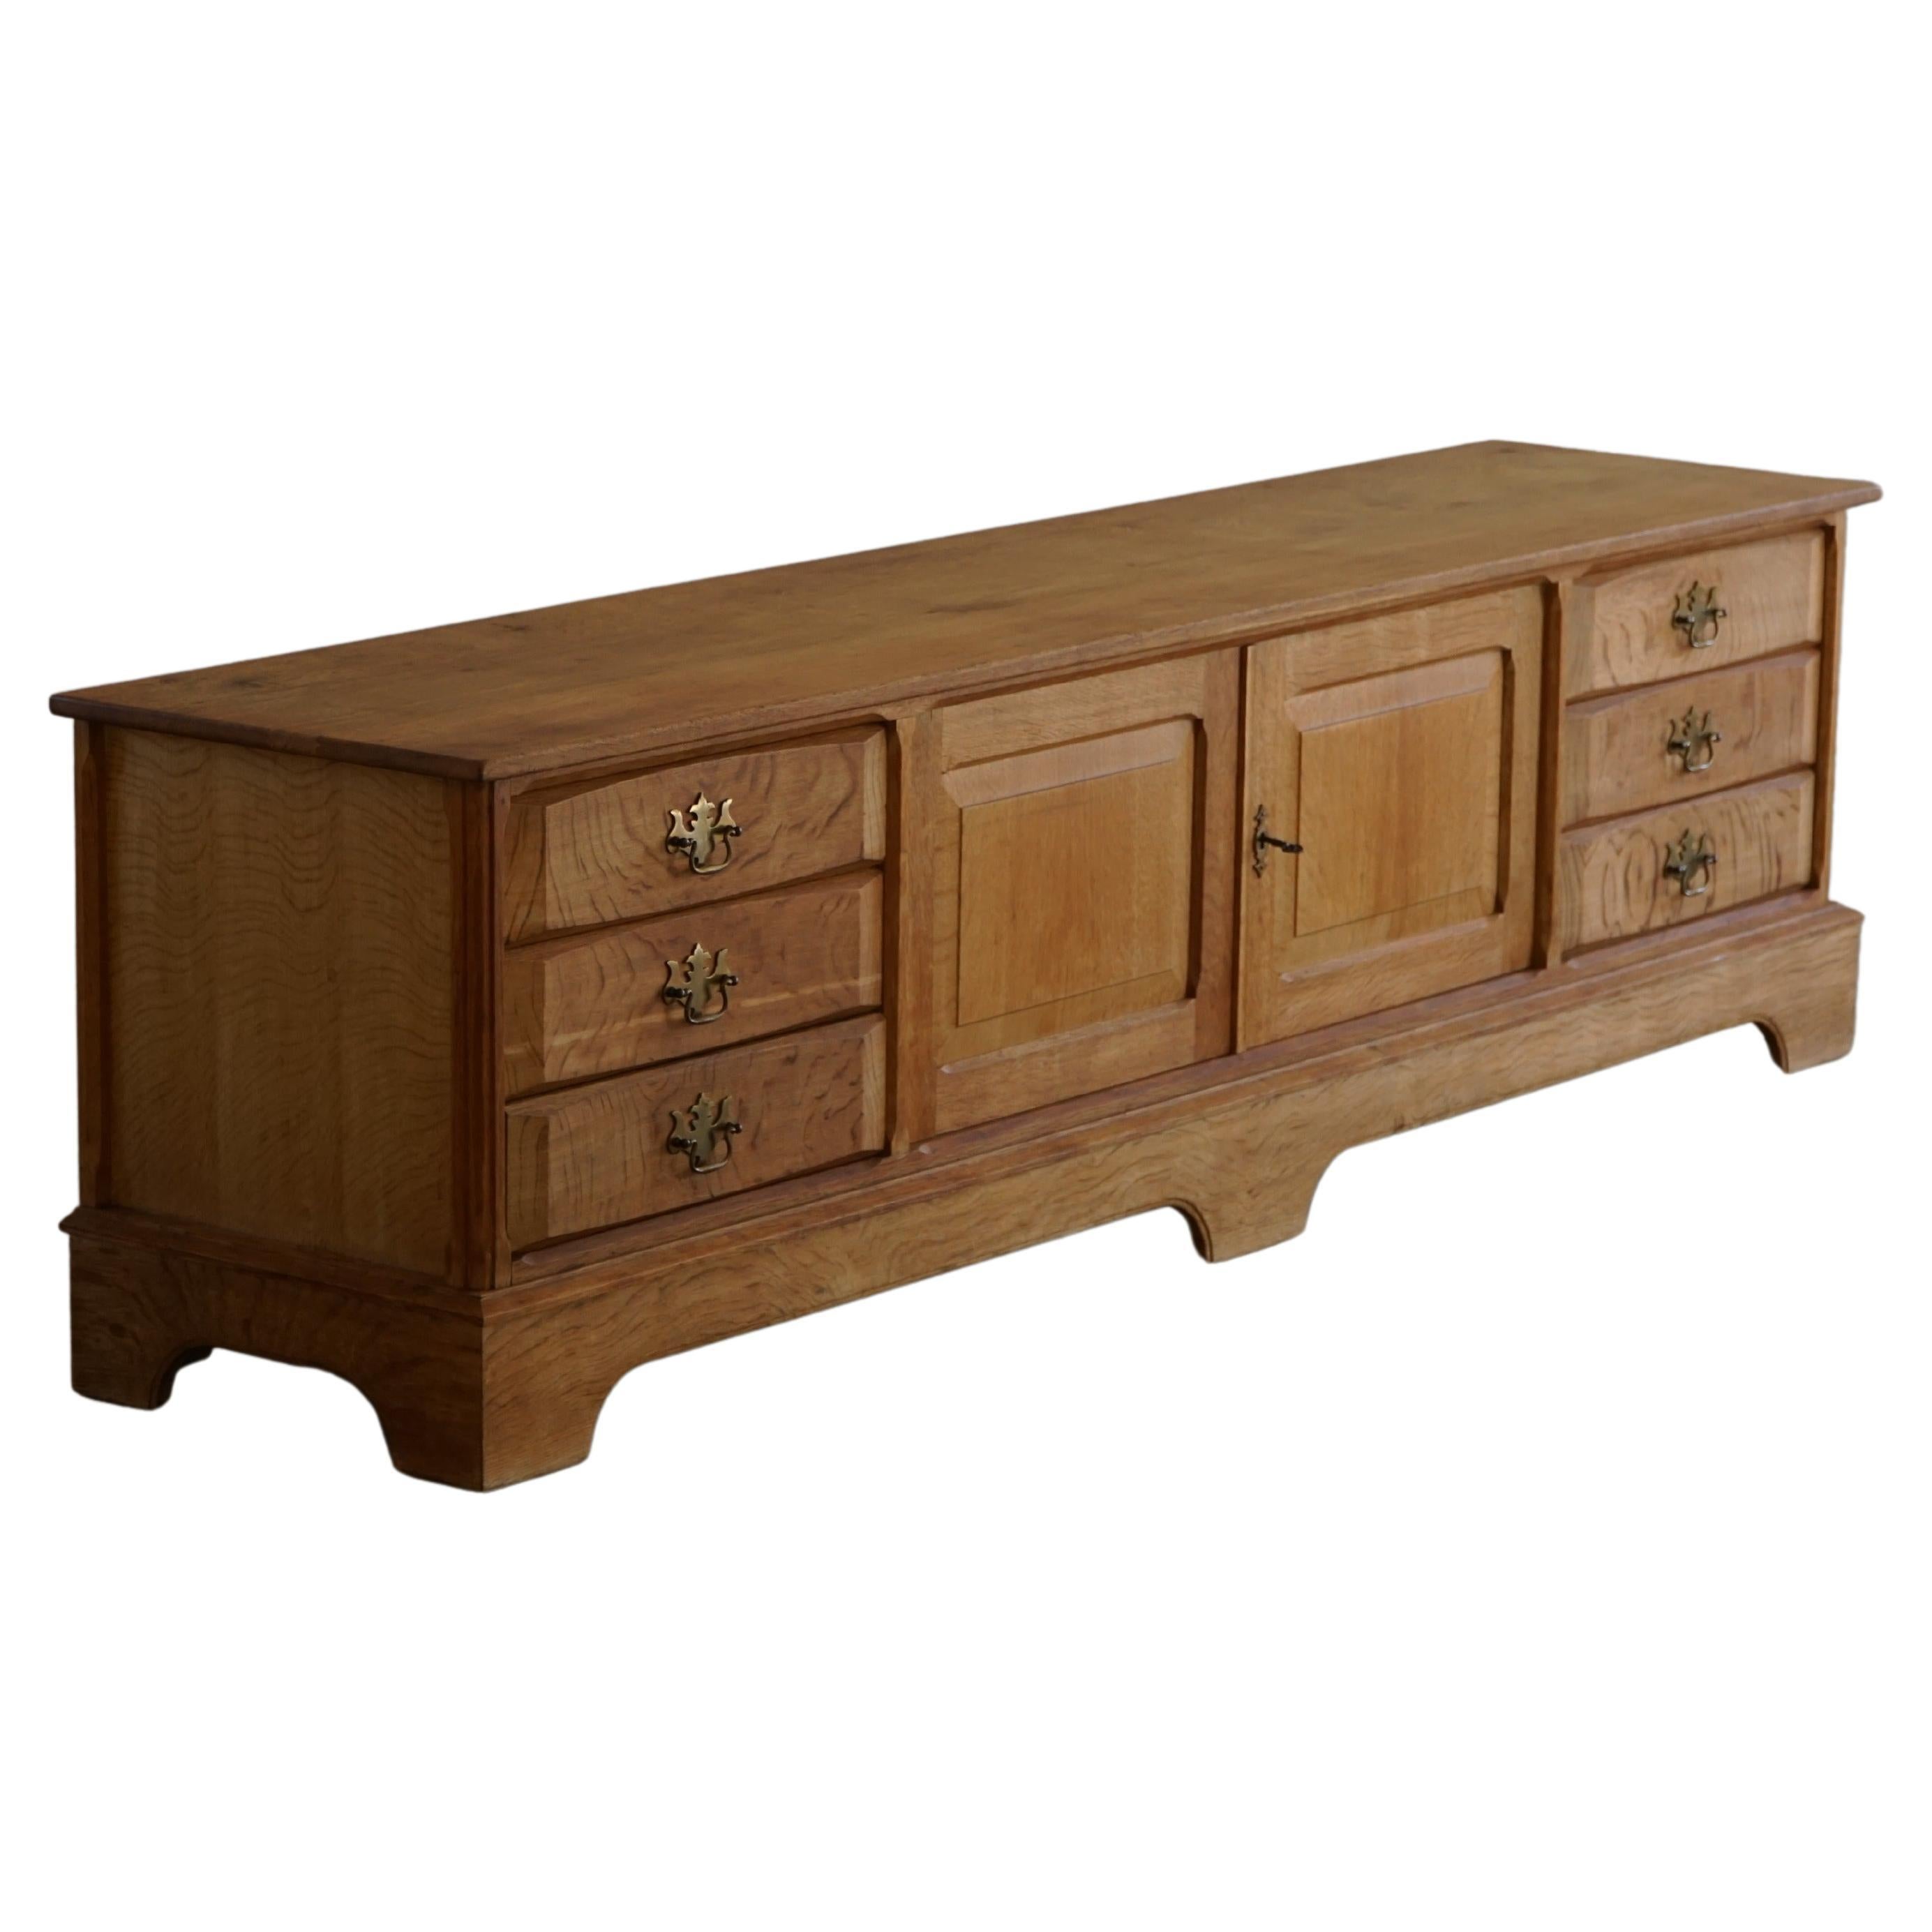 Low Sideboard in Solid Oak, Made by a Danish Cabinetmaker, Midcentury, 1960s